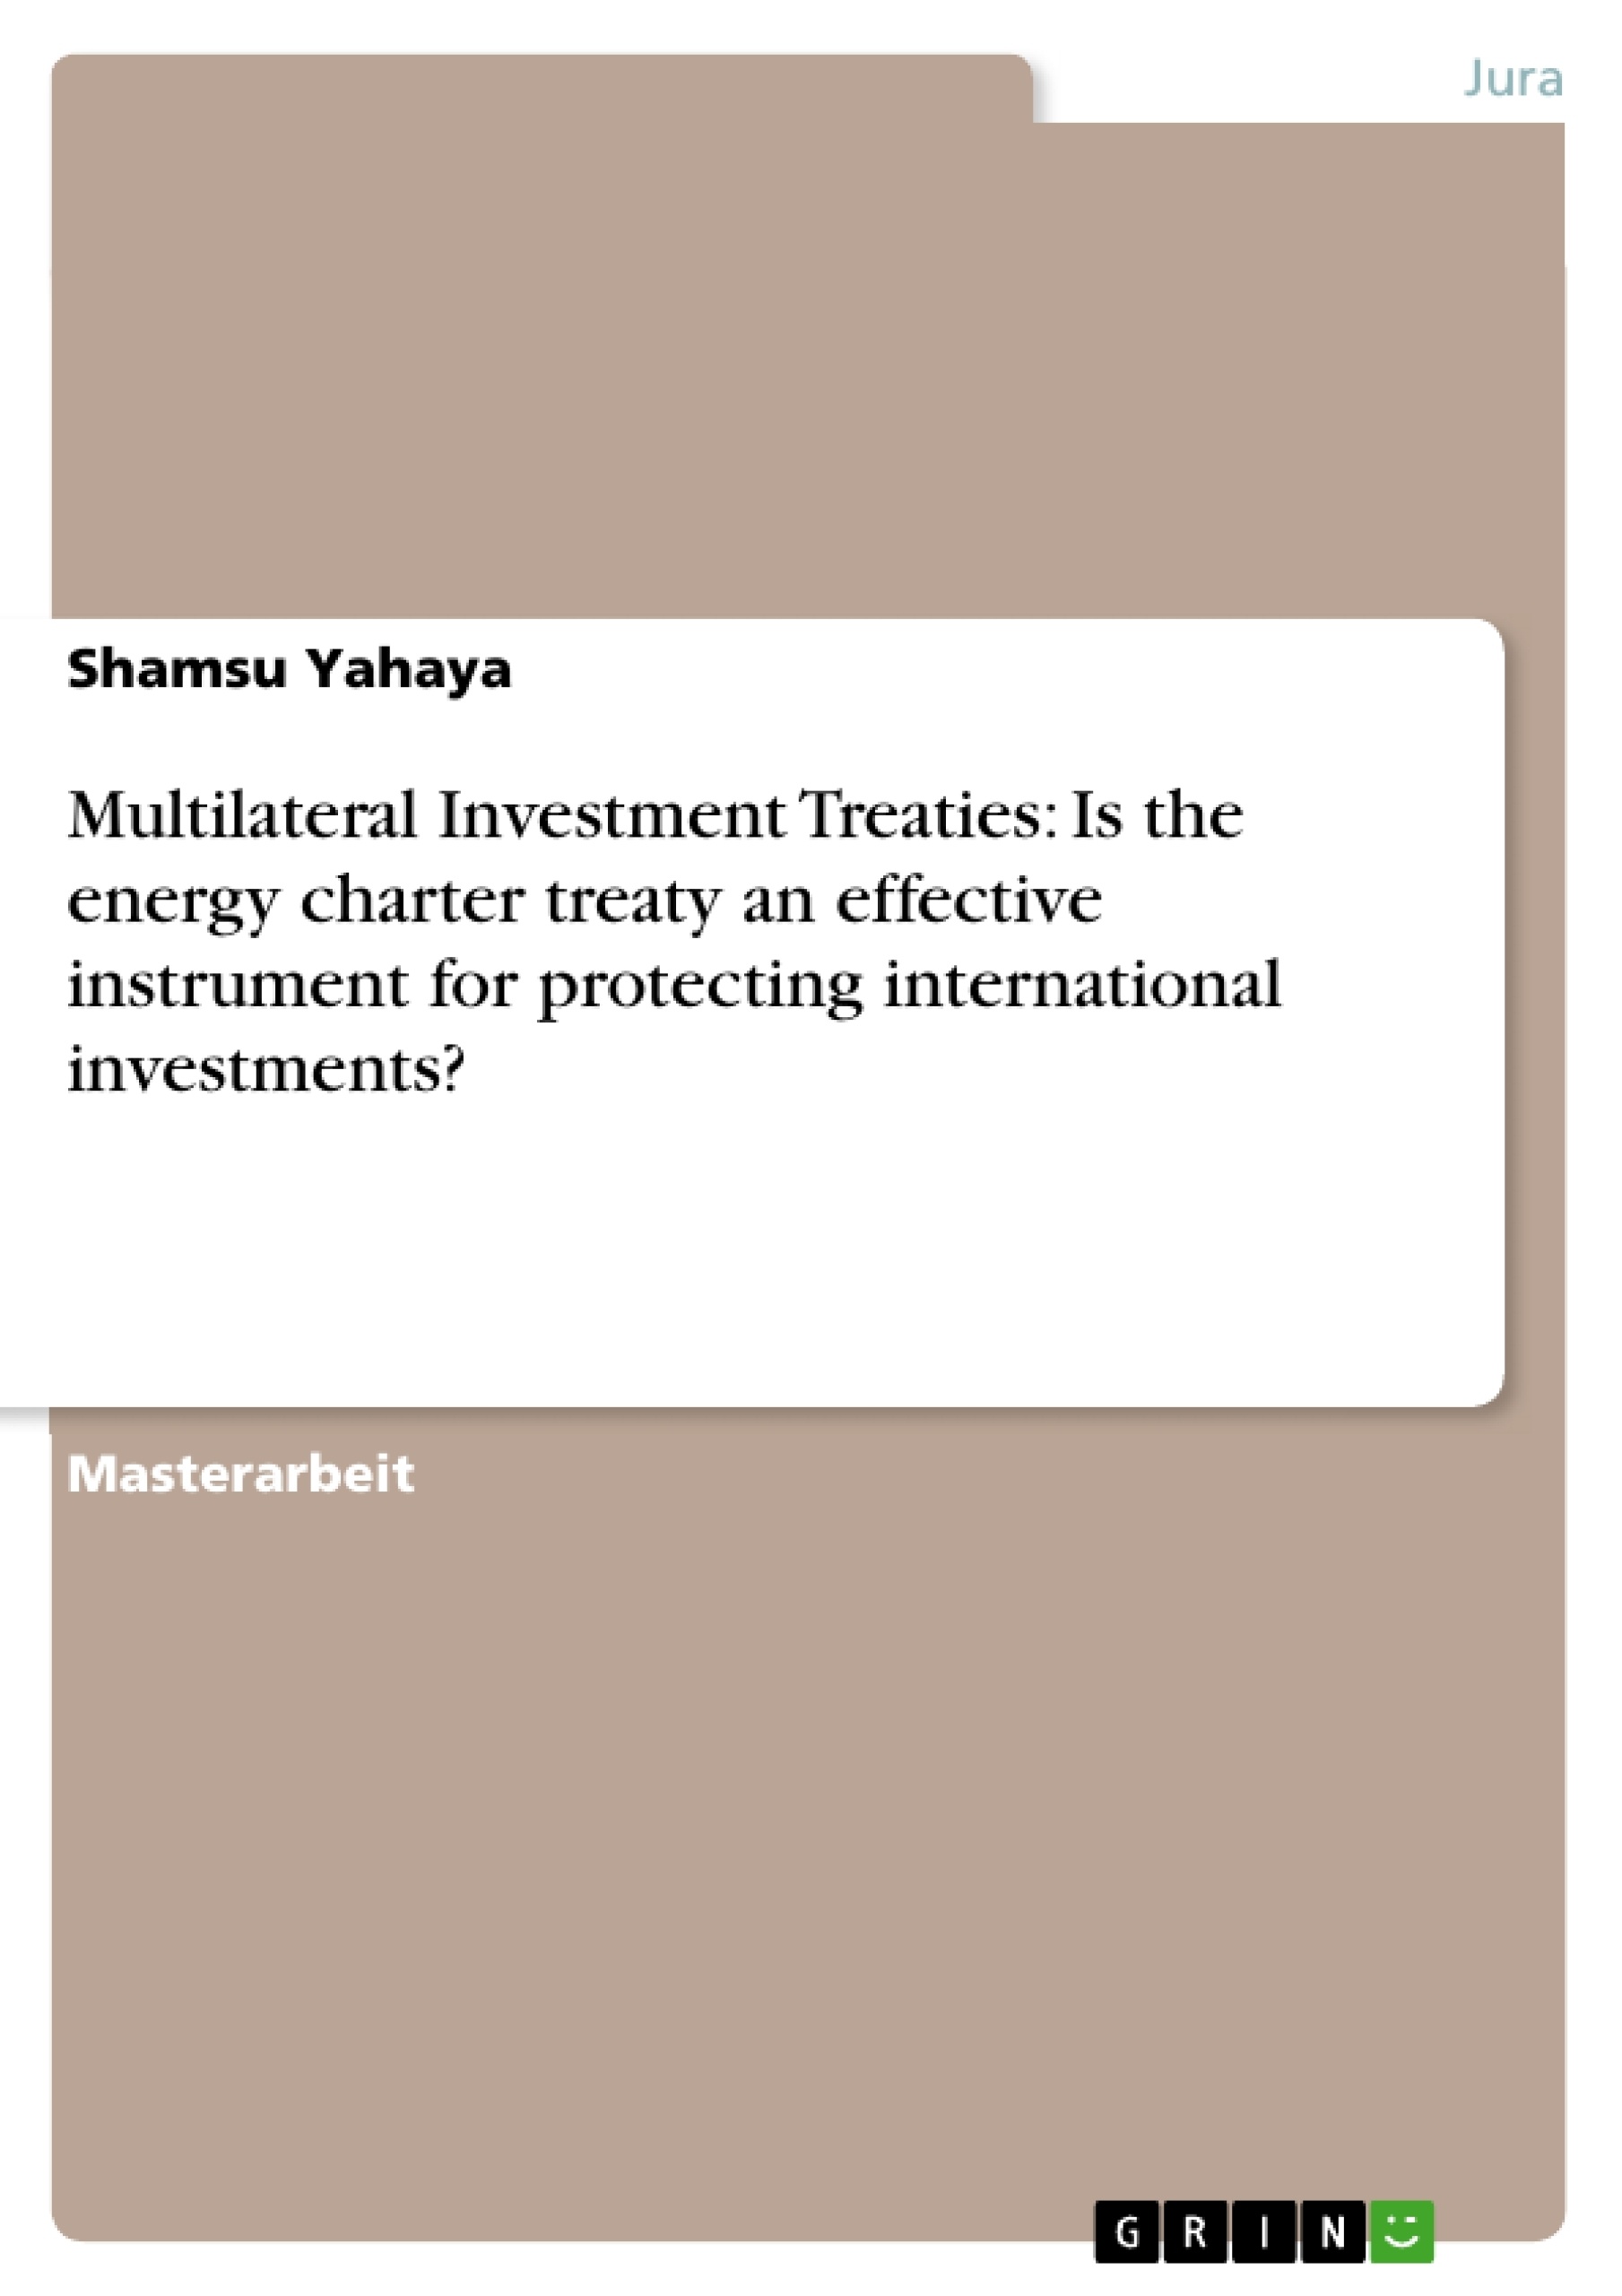 Title: Multilateral Investment Treaties: Is the energy charter treaty an effective instrument for protecting international investments?